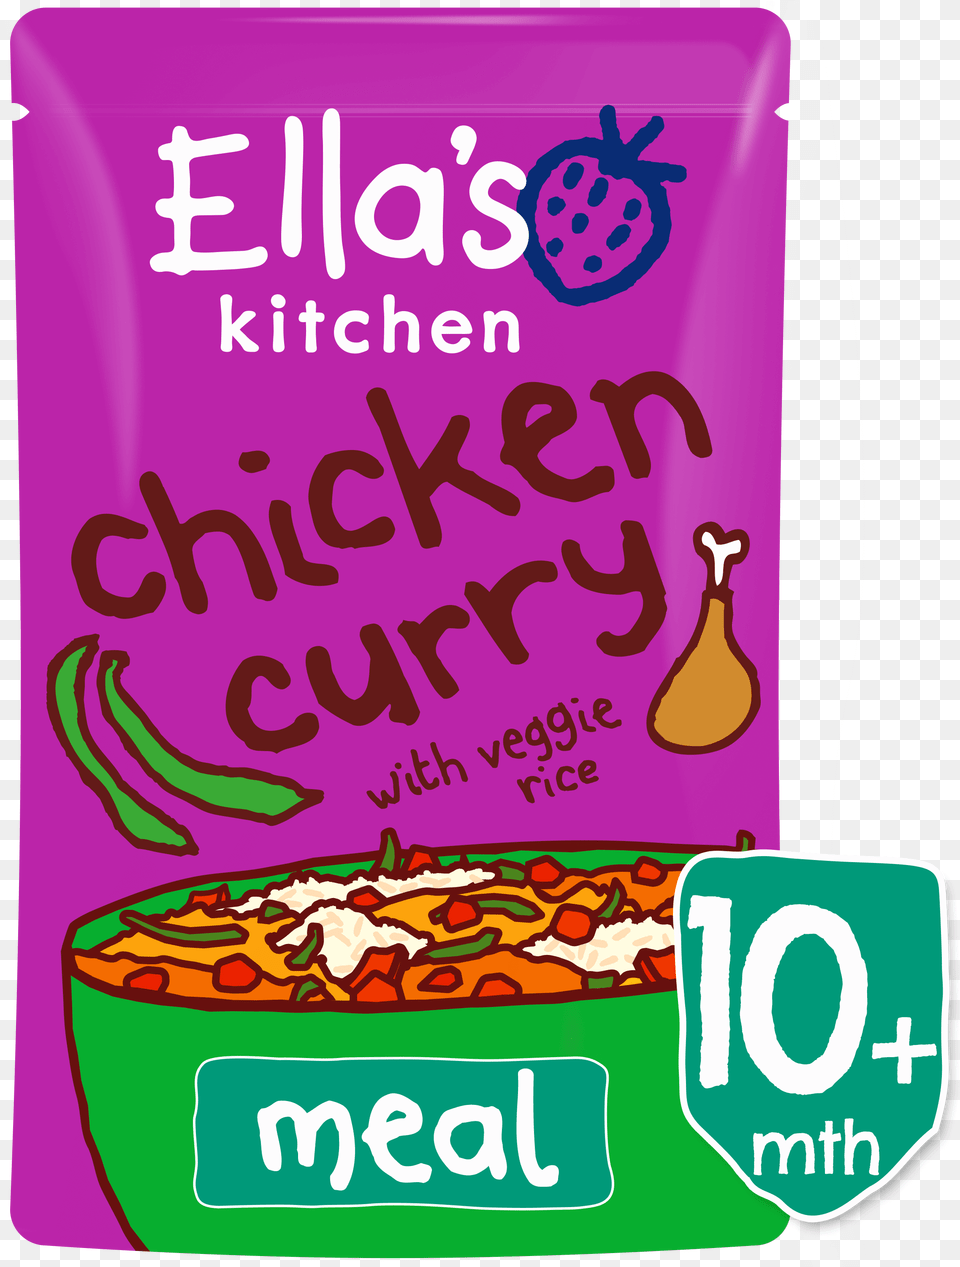 Nicely Spiced Chicken Curry With Veggie Rice Ella39s Kitchen Chicken Curry Recipe, Advertisement, Food, Lunch, Meal Png